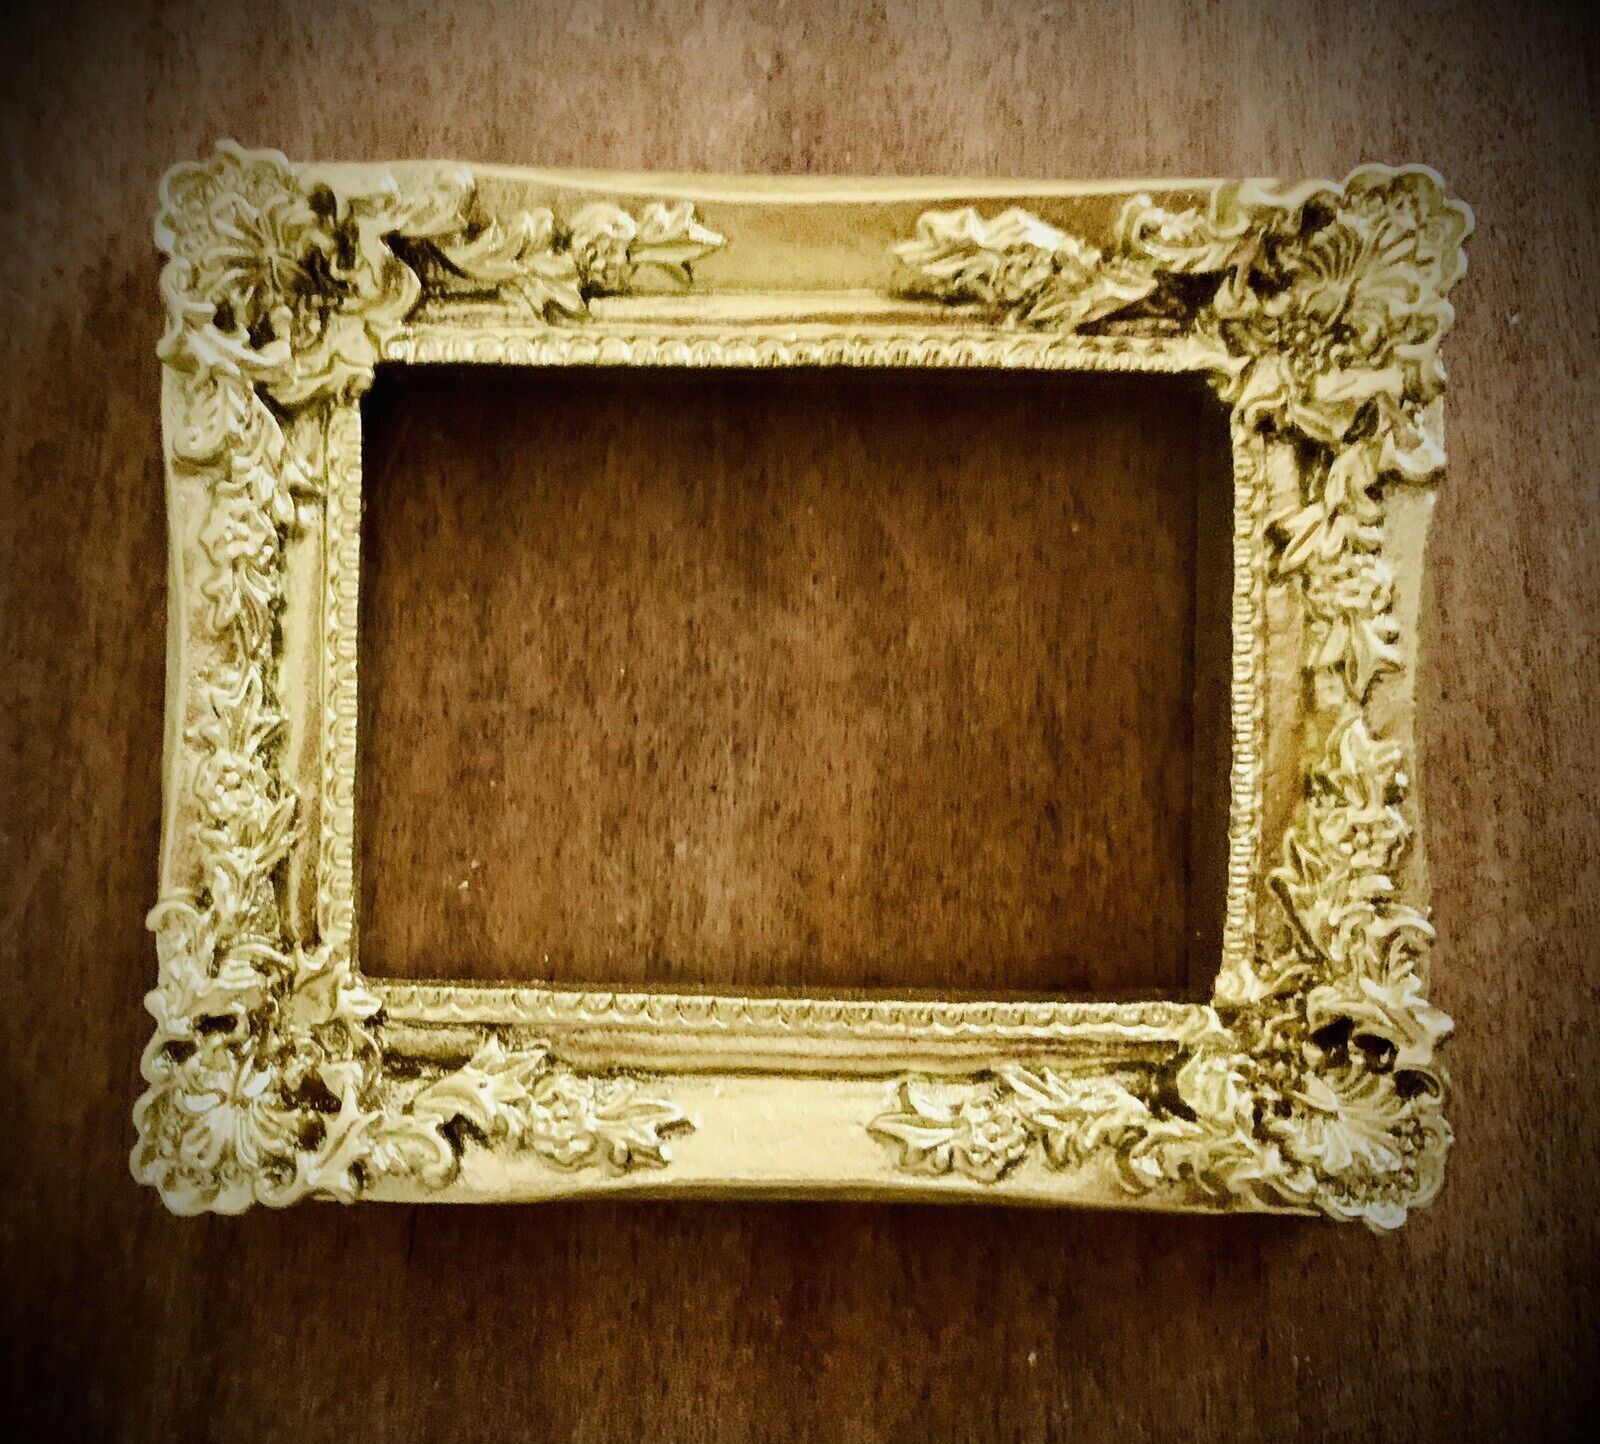 Miniature 1:12 Victorian Ornate Style Rectangle Open Picture Frame Dollhouse